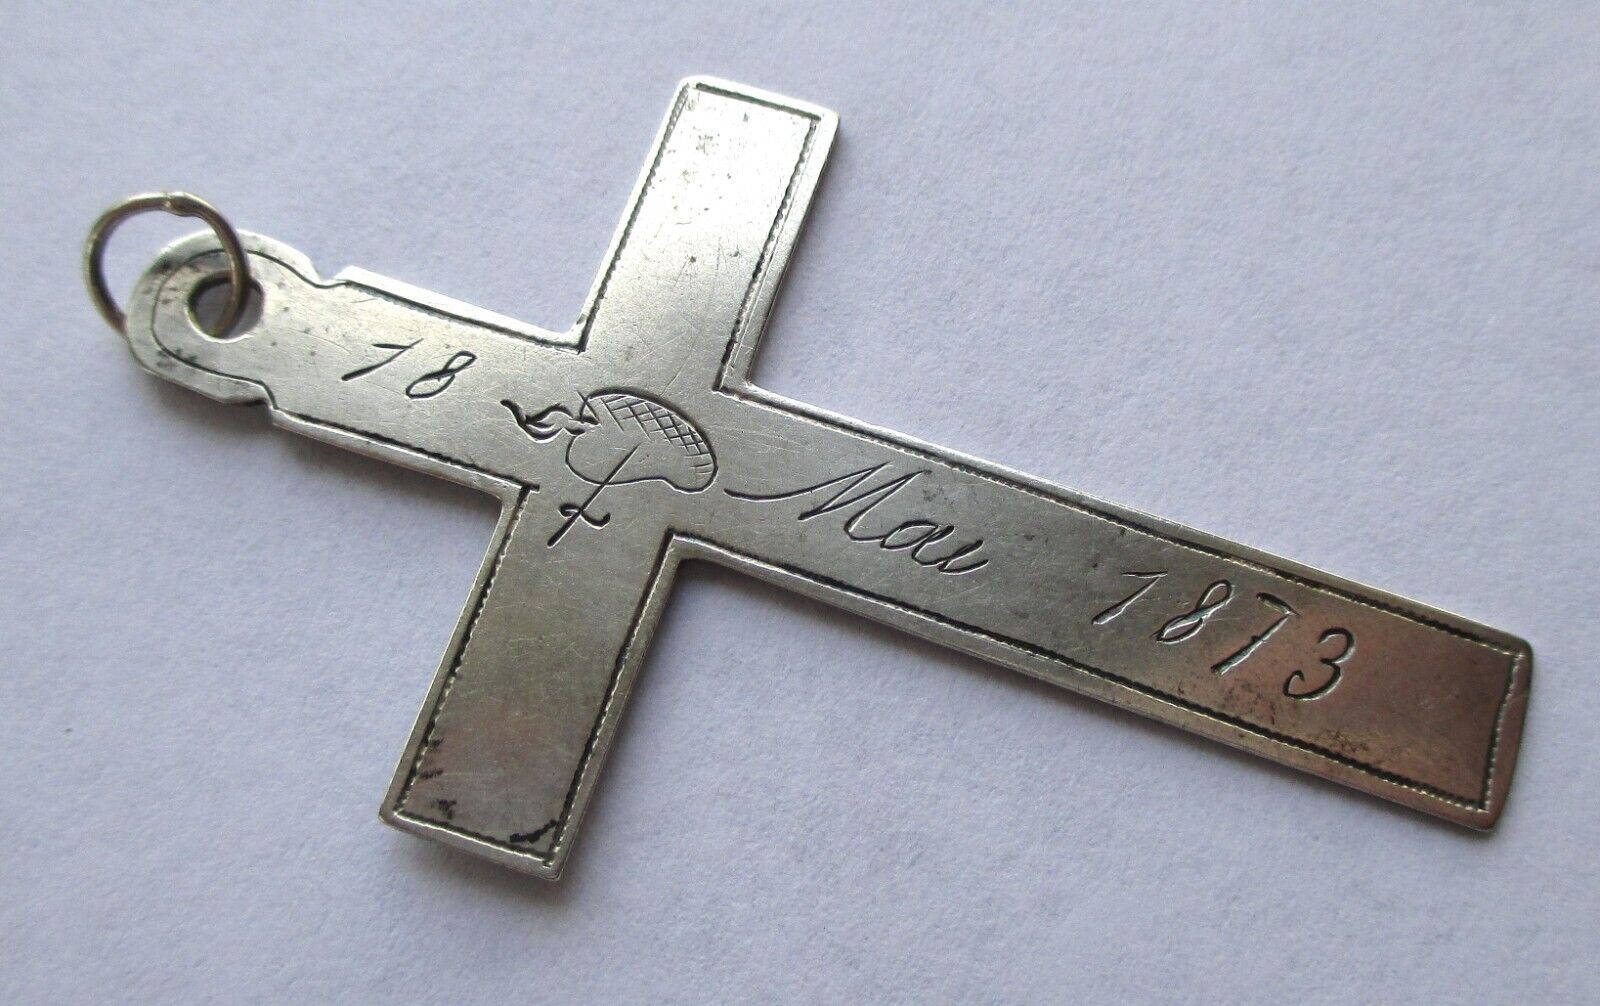 ANTIQUE SILVER ENGRAVED DATED FRENCH NUN'S CROSS 1873 SACRED HEART